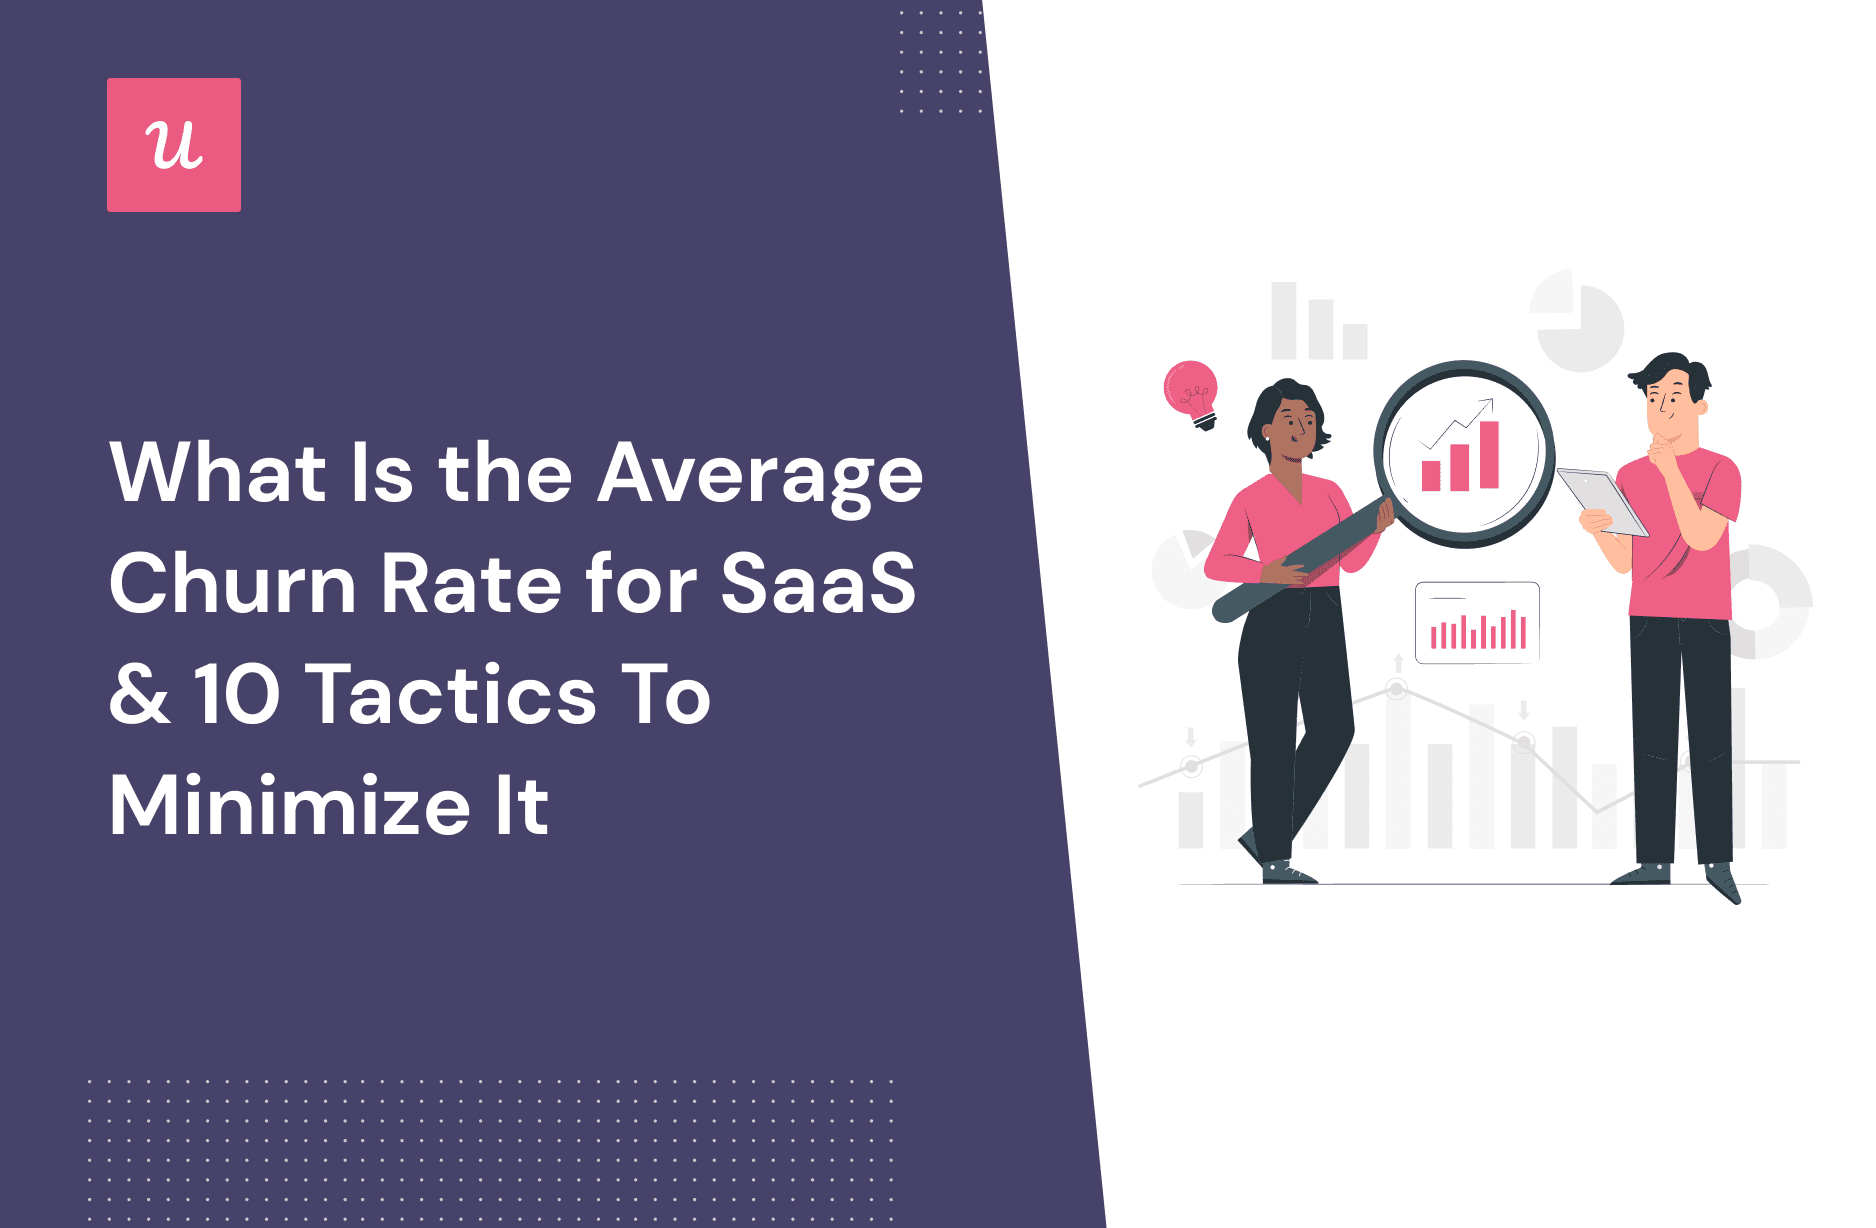 What Is the Average Churn Rate for SaaS & 10 Tactics To Minimize It cover